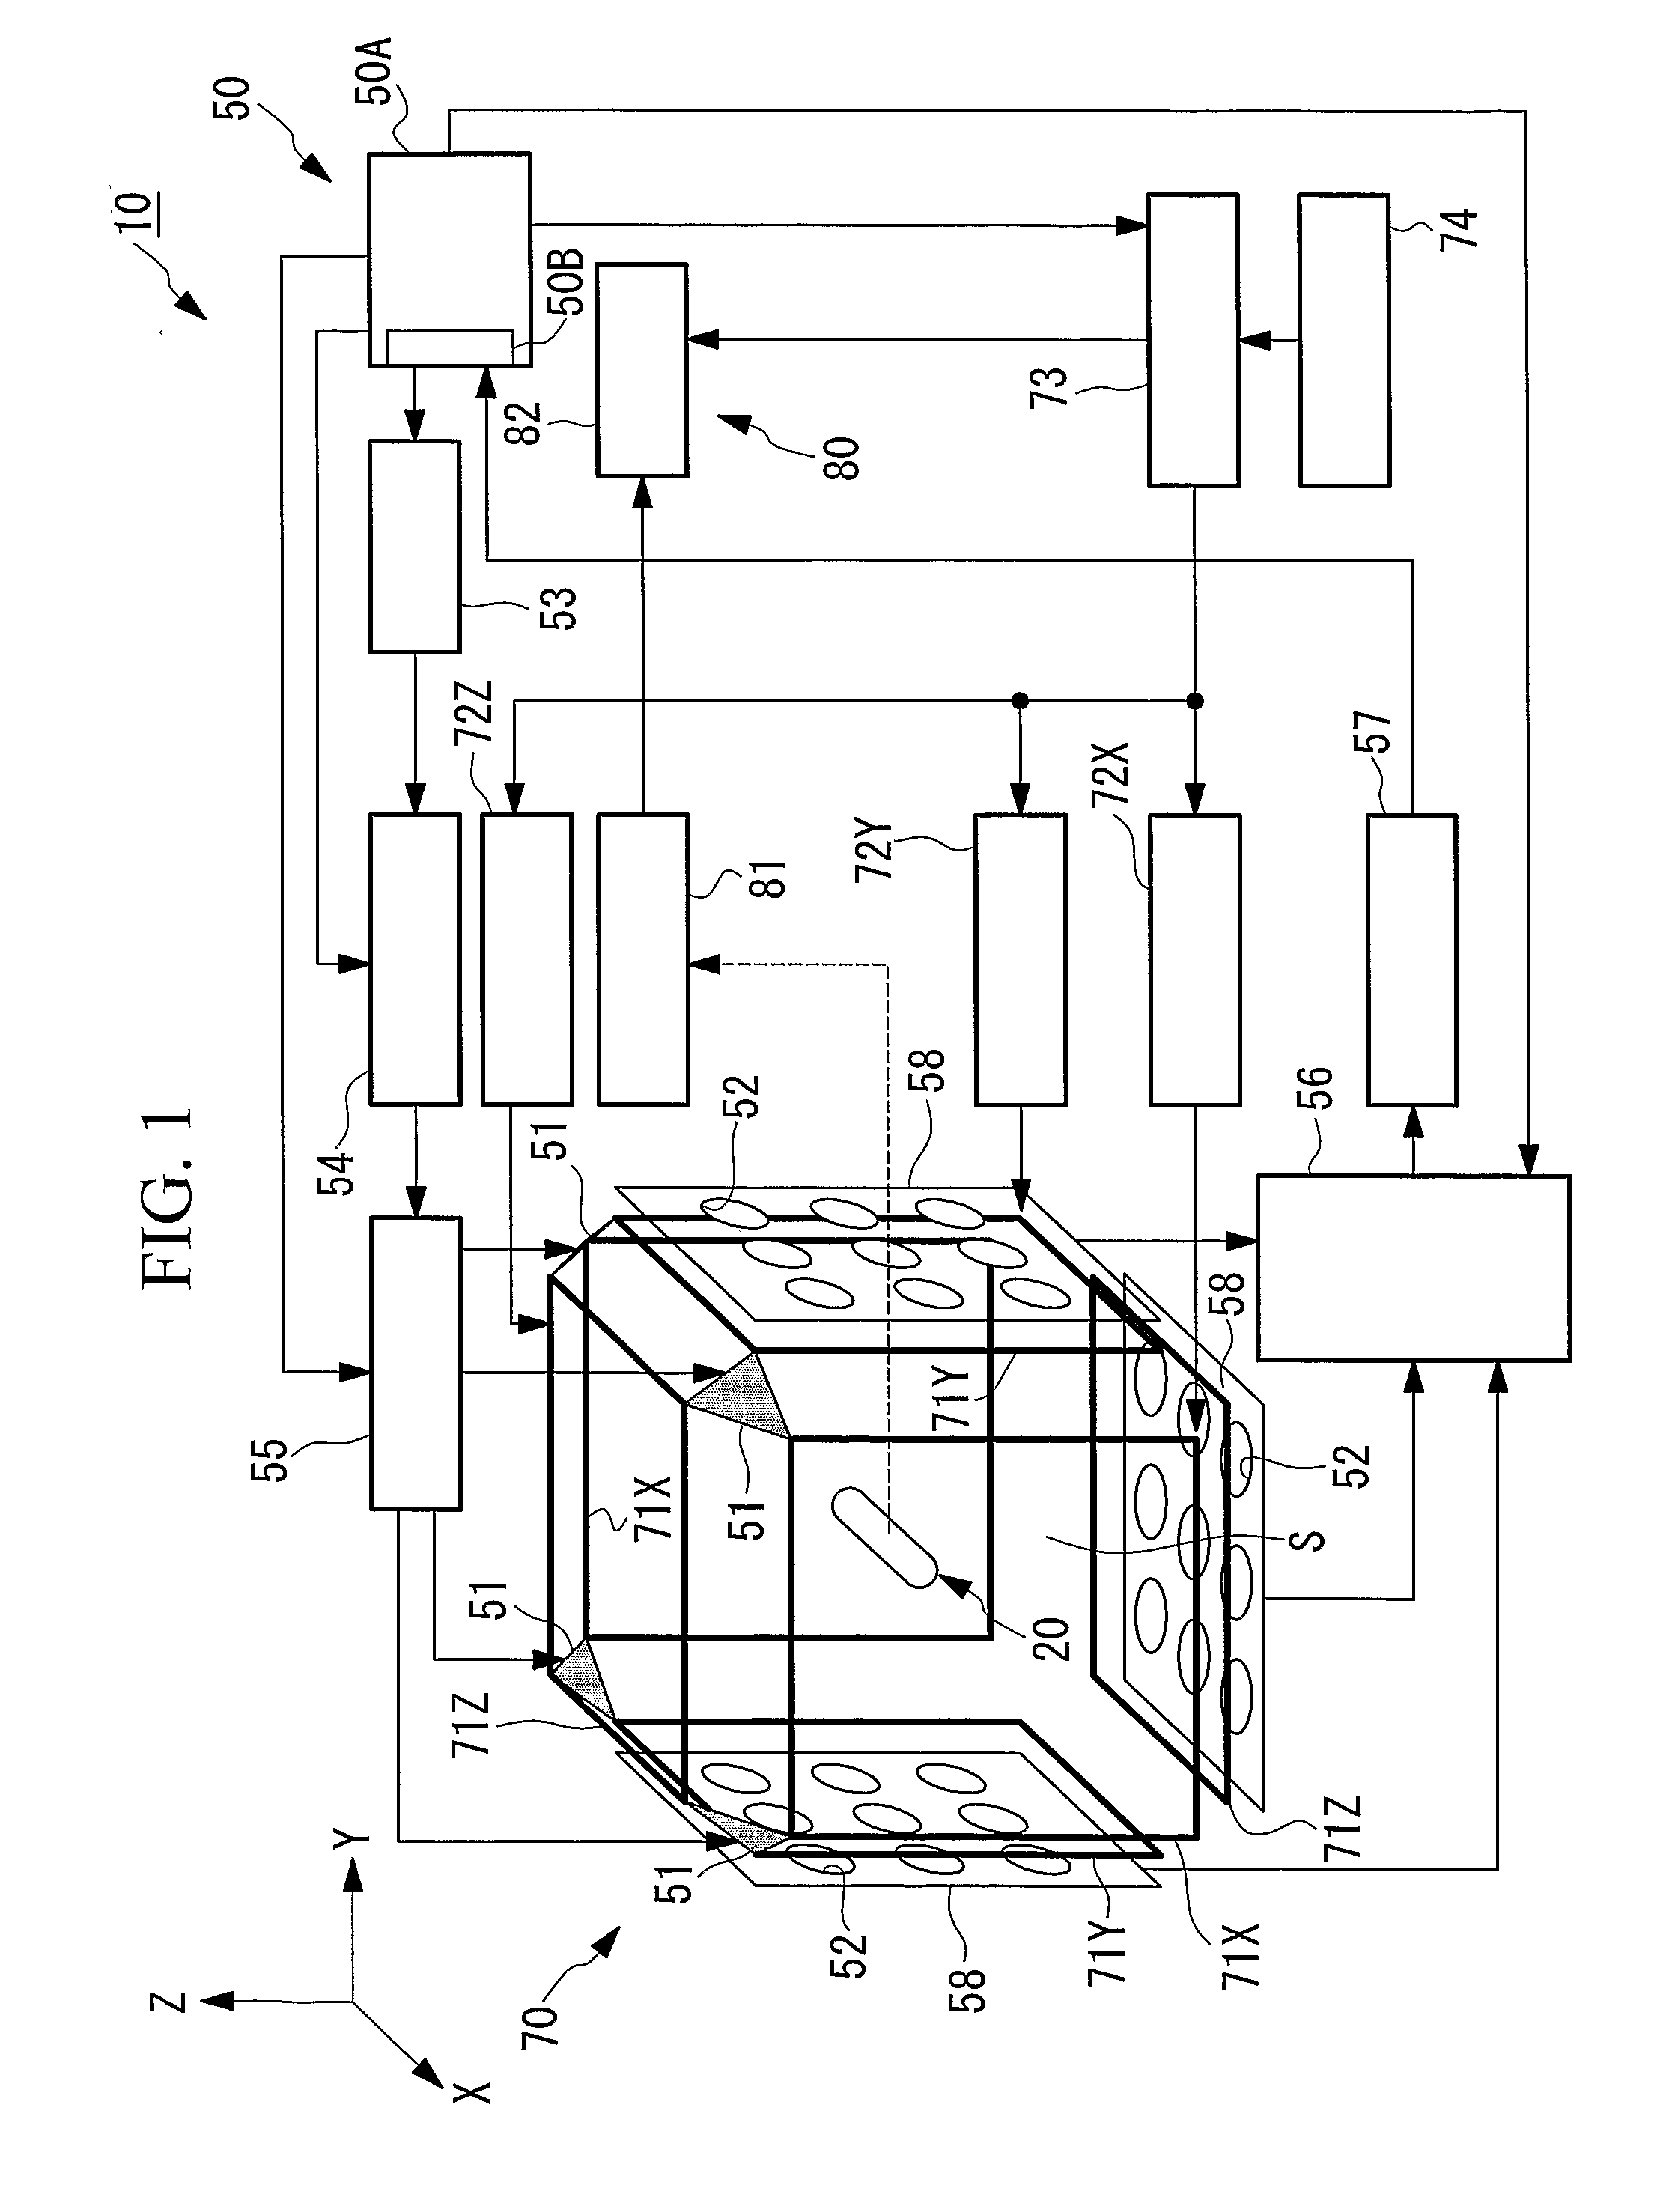 Position Detection System, Guidance System, Position Detection Method, Medical Device, and Medical Magnetic-Induction and Position-Detection System